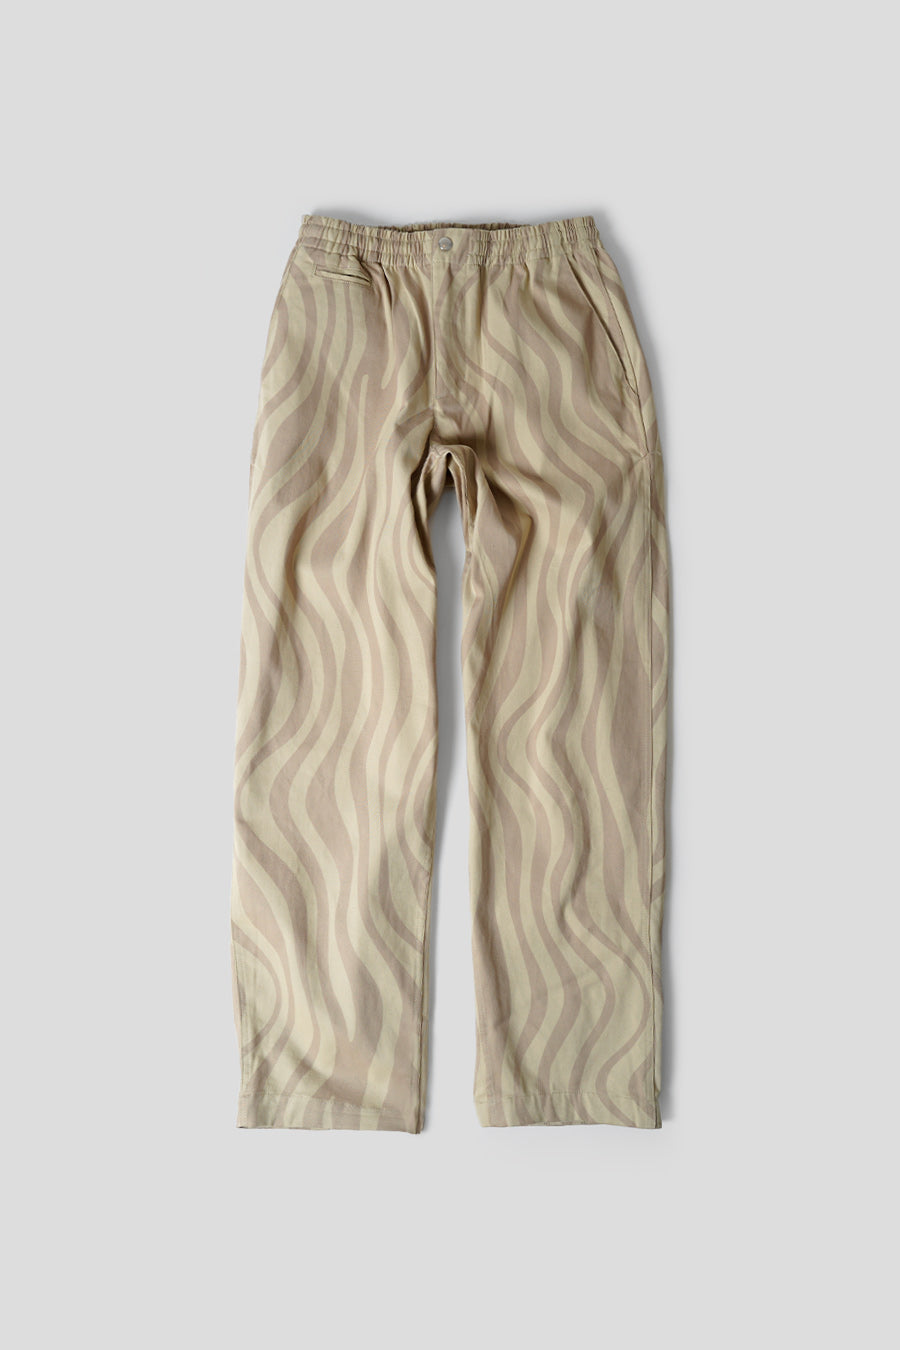 BY PARRA - BEIGE FLOWING STRIPED TROUSERS - LE LABO STORE